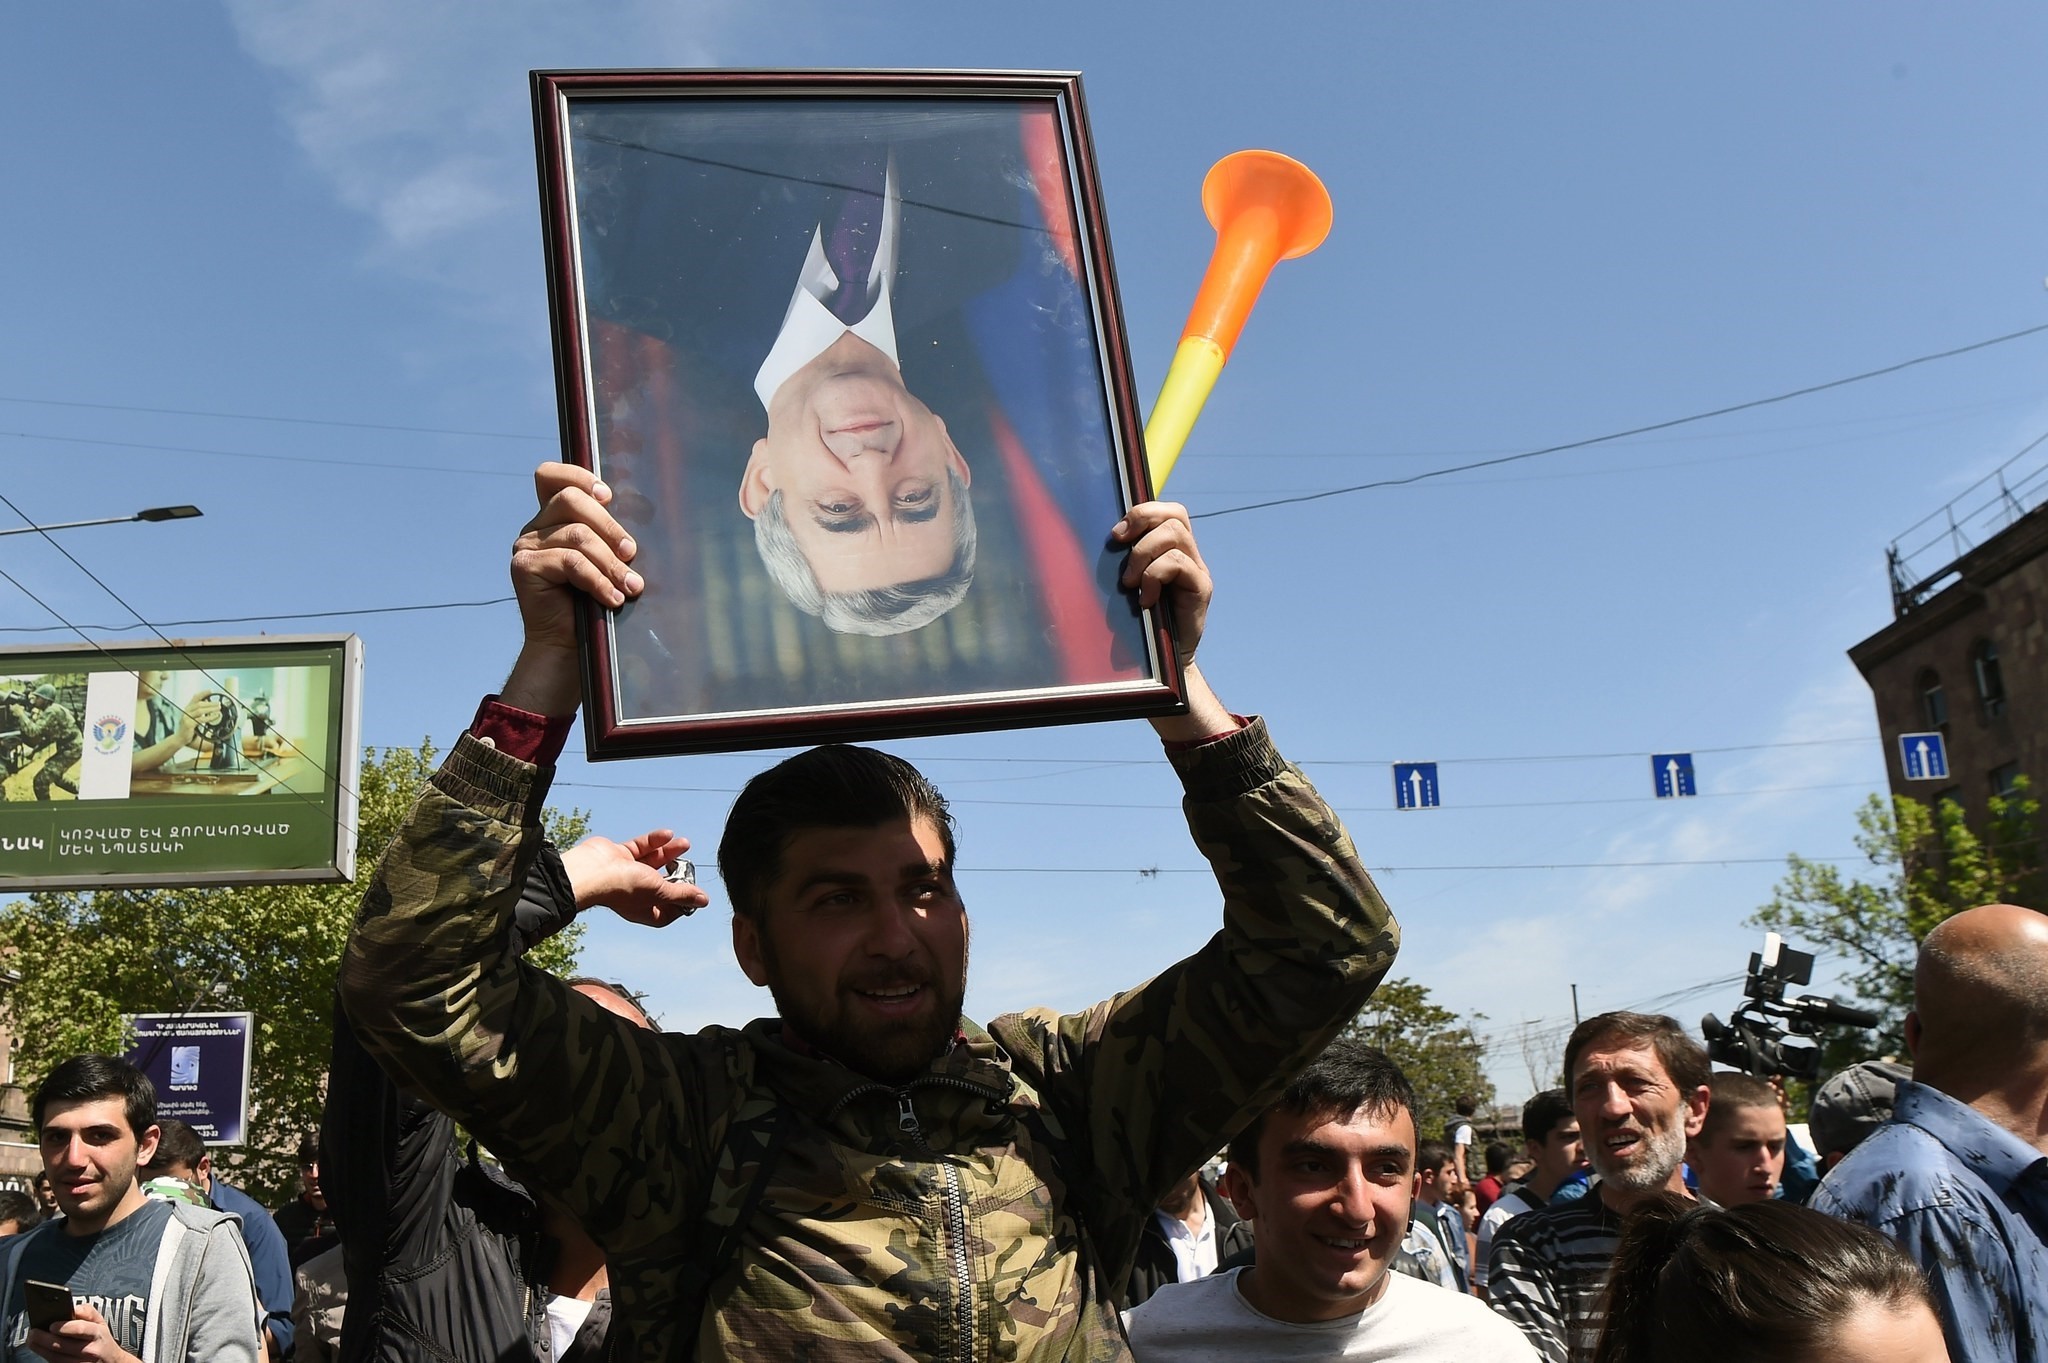 Activists of '#merjirserjin' (Reject Serzh) initiative hold a protest march against recently nominated Armenian Prime Minsiter, former President Serzh Sargsyan in Yerevan, Armenia, 19 April 2018. (EPA Photo)